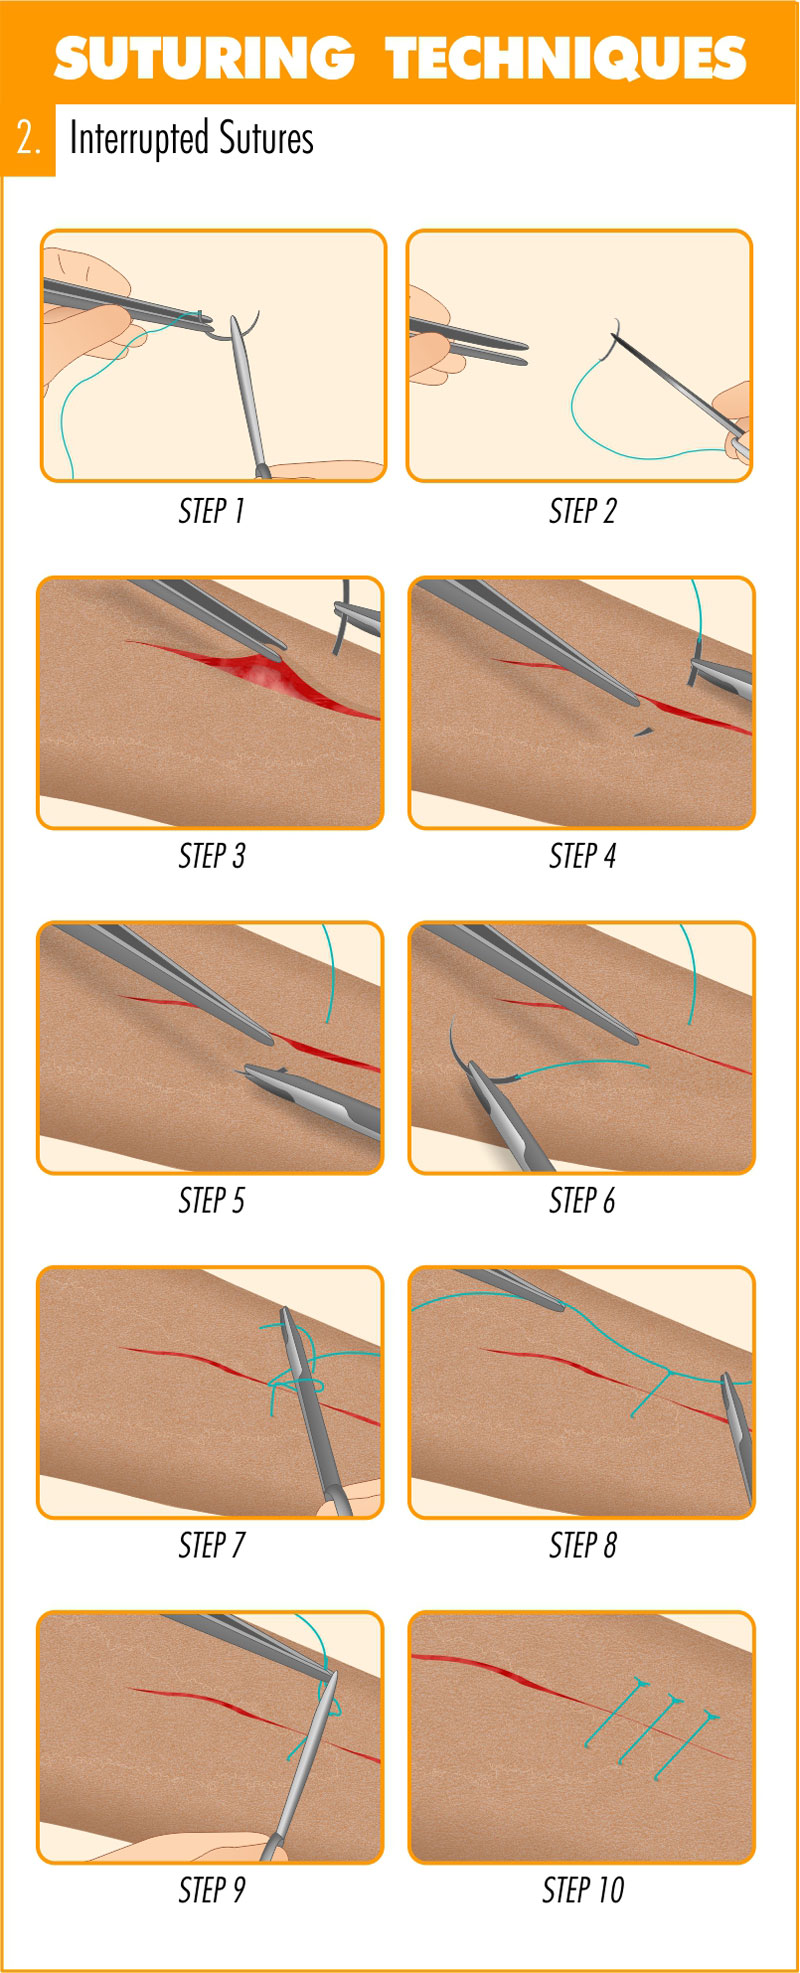 Staged Excision Technique to Reduce Scar Length - ScienceDirect